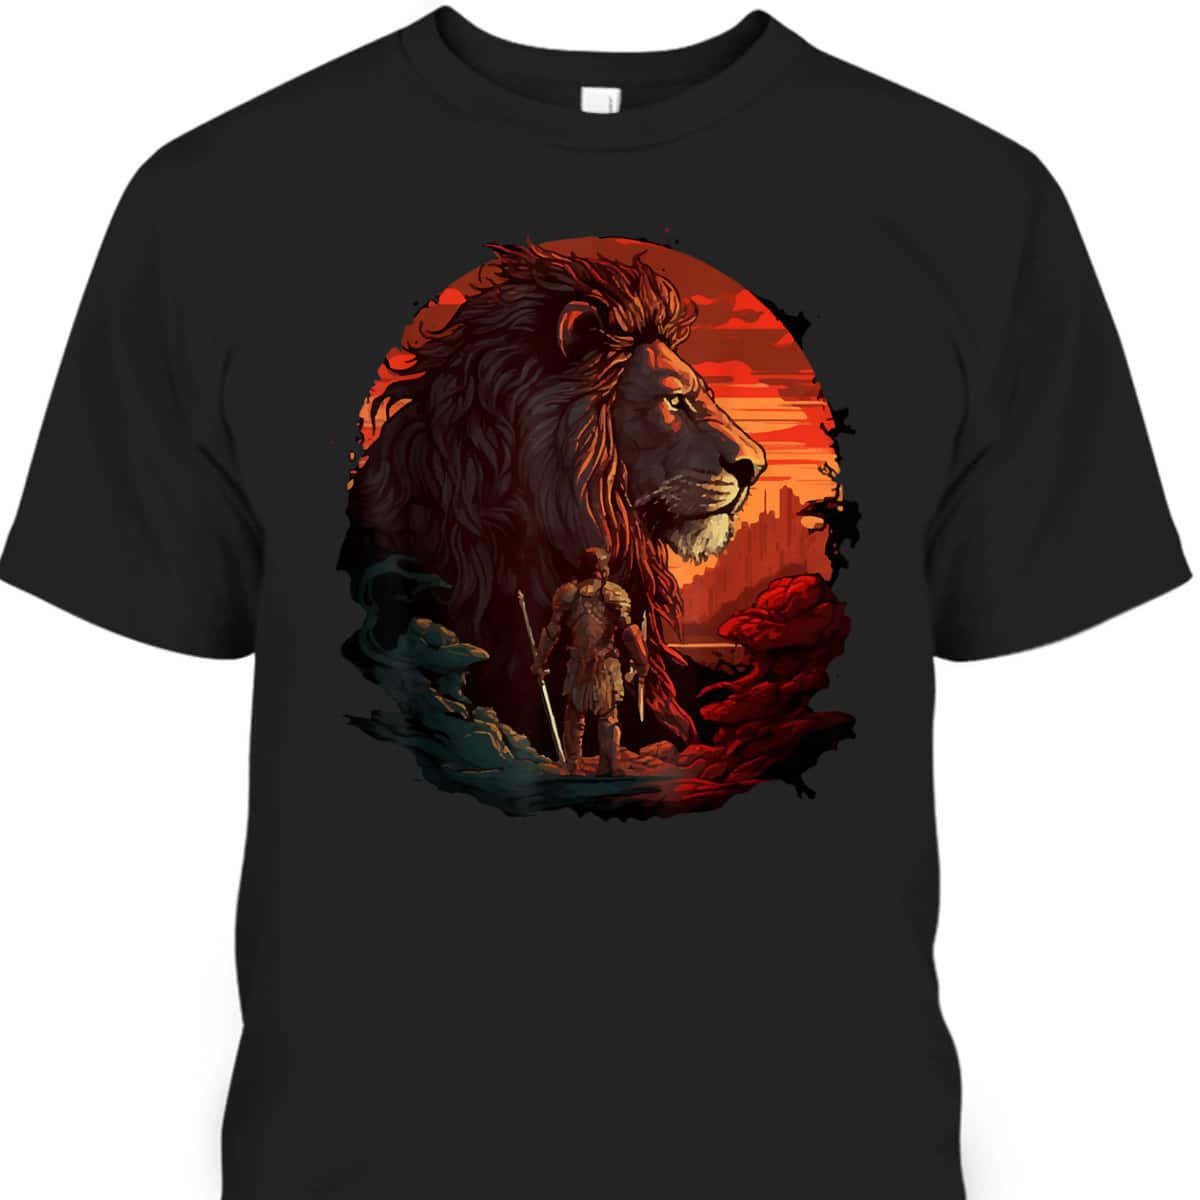 Lion Of Judah Christian Armor Of God T-Shirt Religious Fathers Day Gift